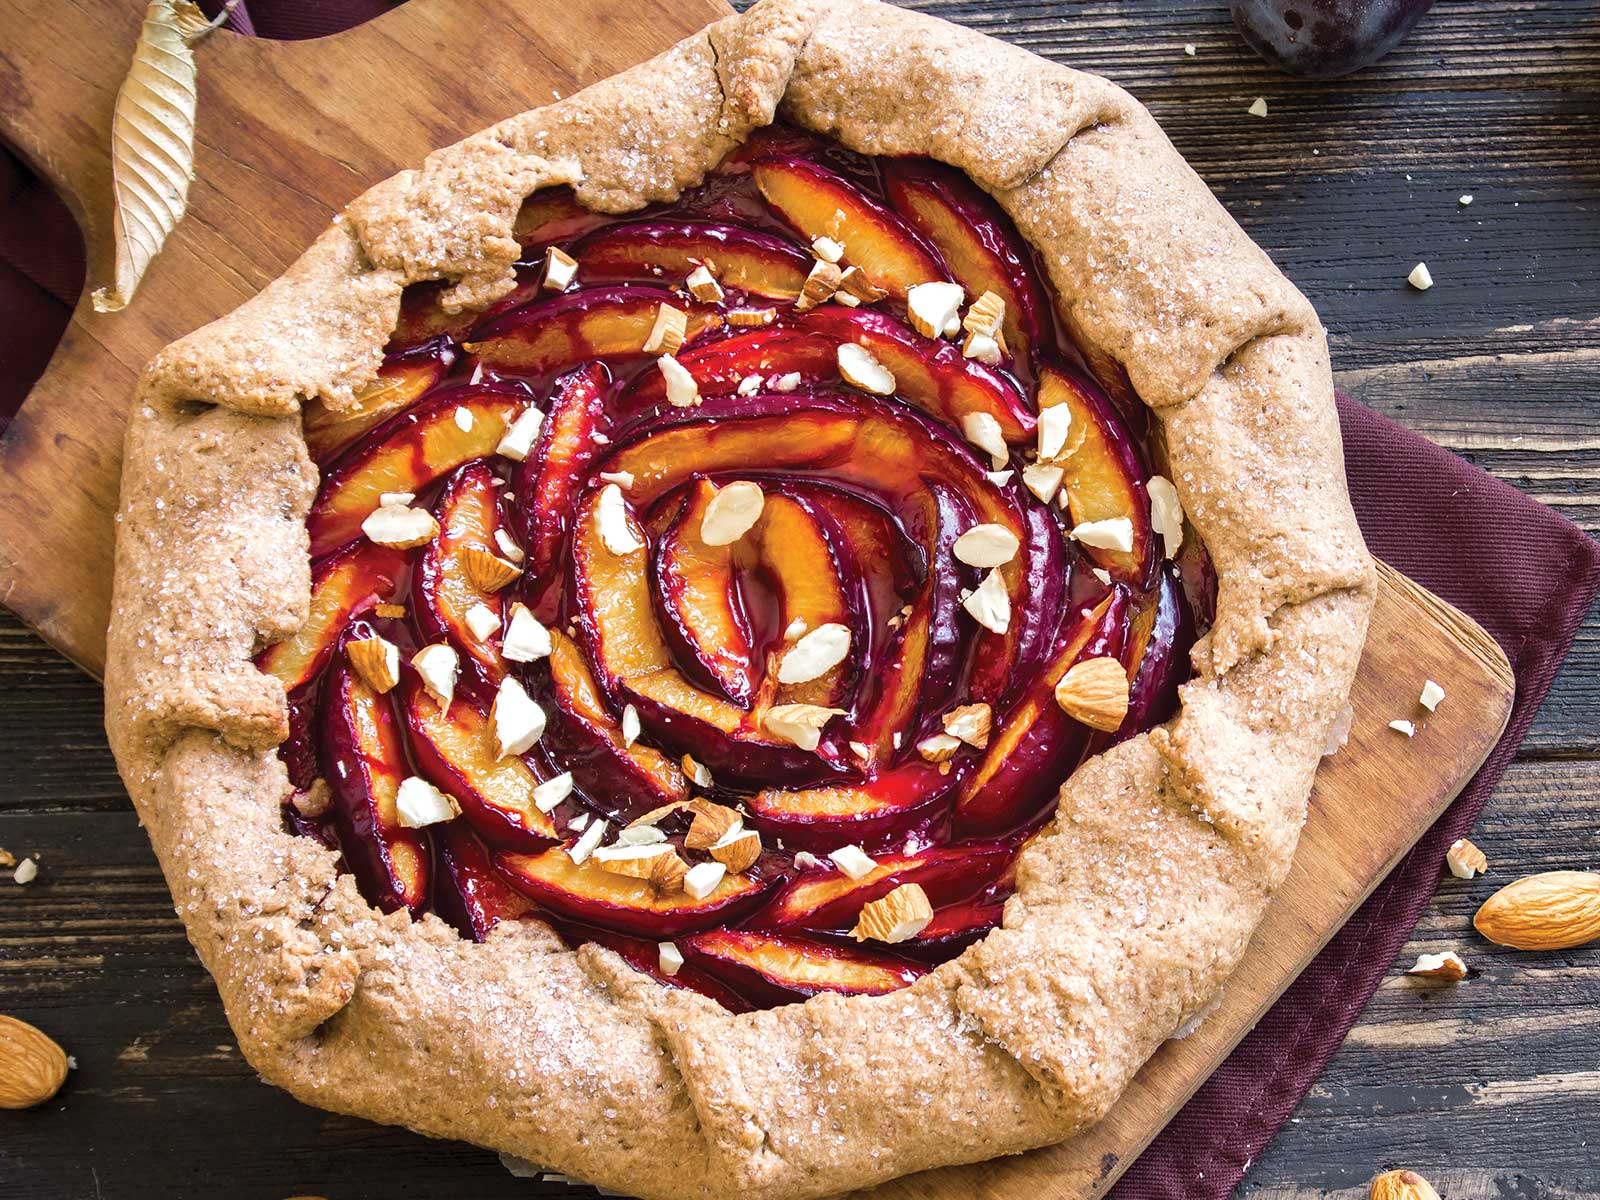 Rustic tart with almonds